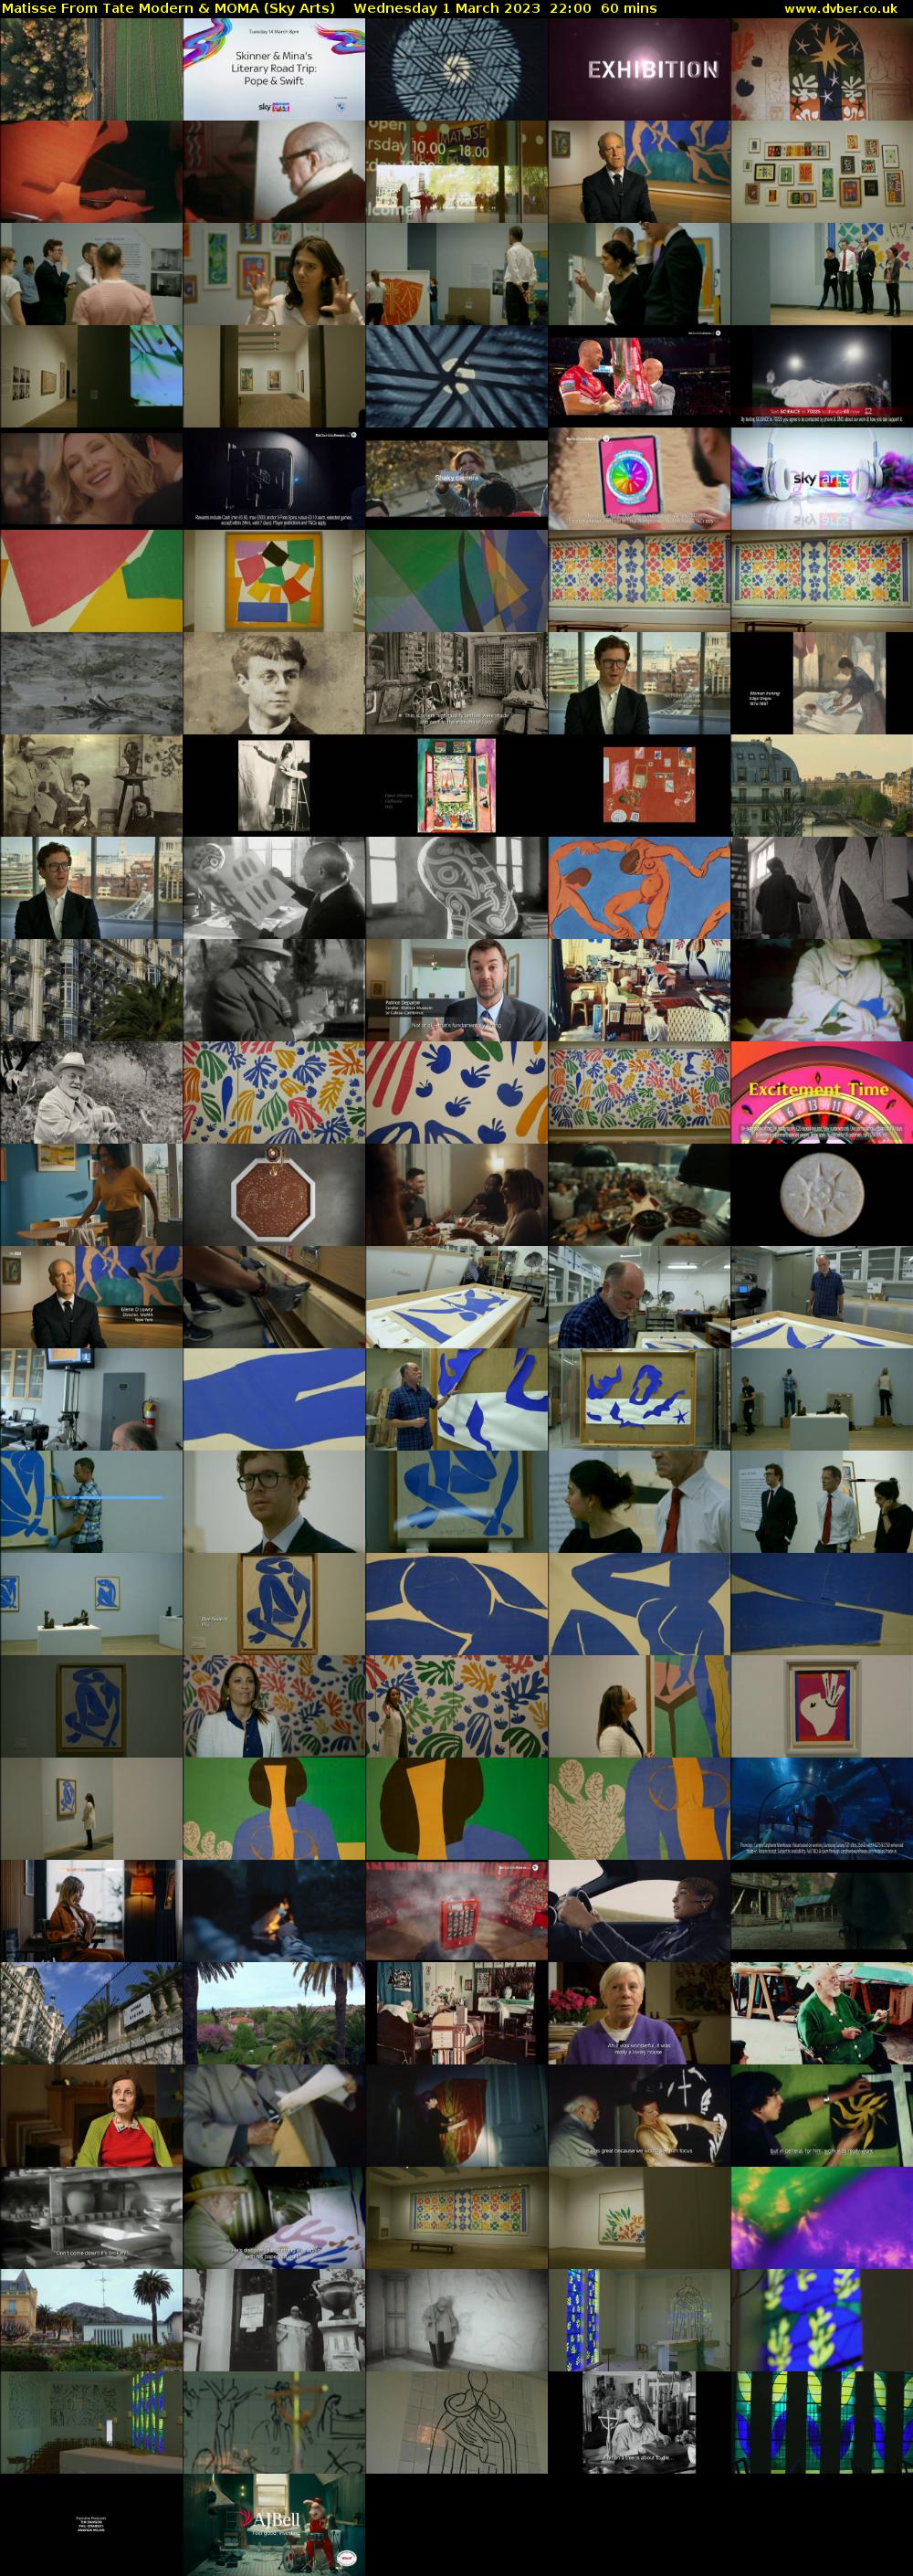 Matisse From Tate Modern & MoMa (Sky Arts) Wednesday 1 March 2023 22:00 - 23:00